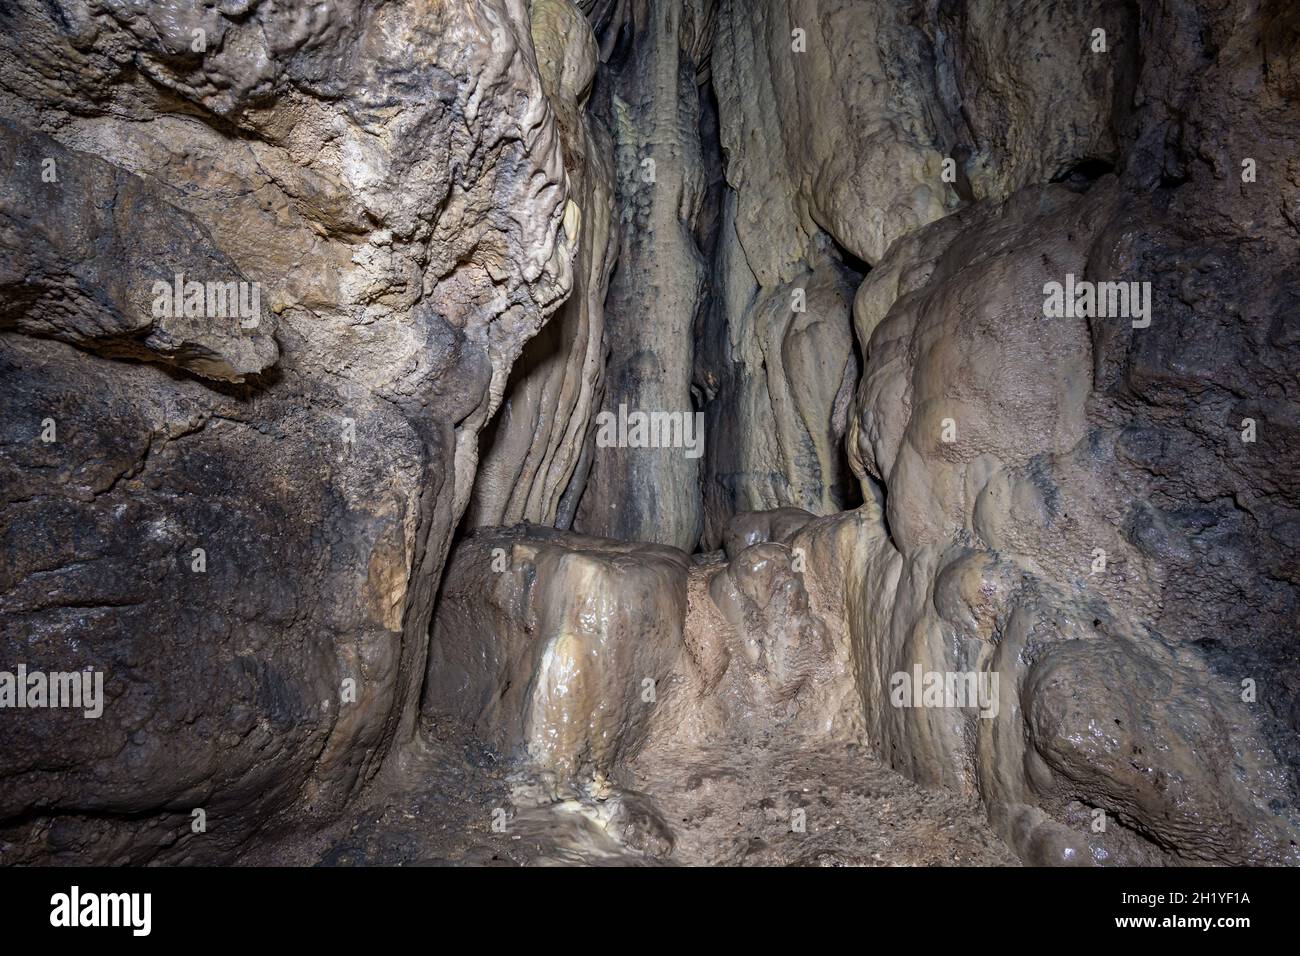 Breathtaking stalactite caves in the Obere Donau Nature Park near Beuron Sigmaringen Stock Photo